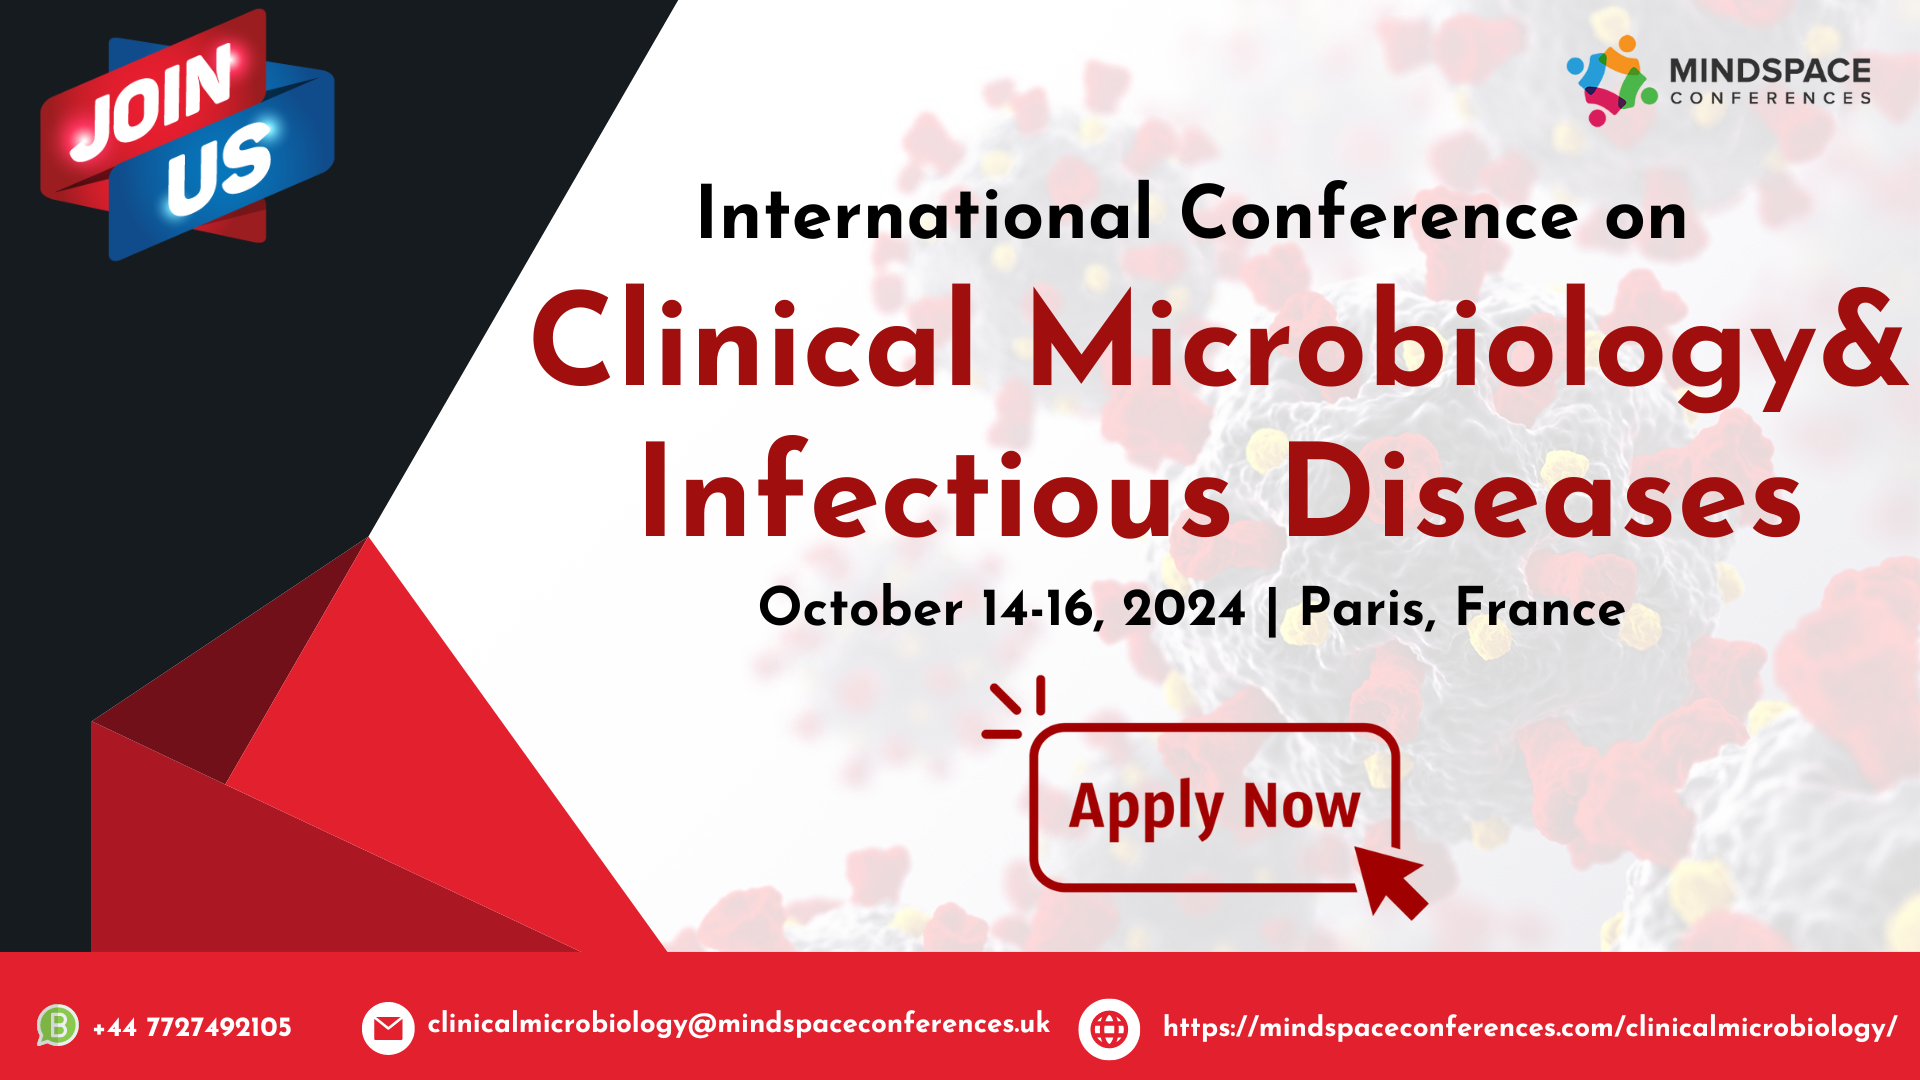 International Conference on Clinical Microbiology and Infectious Diseases